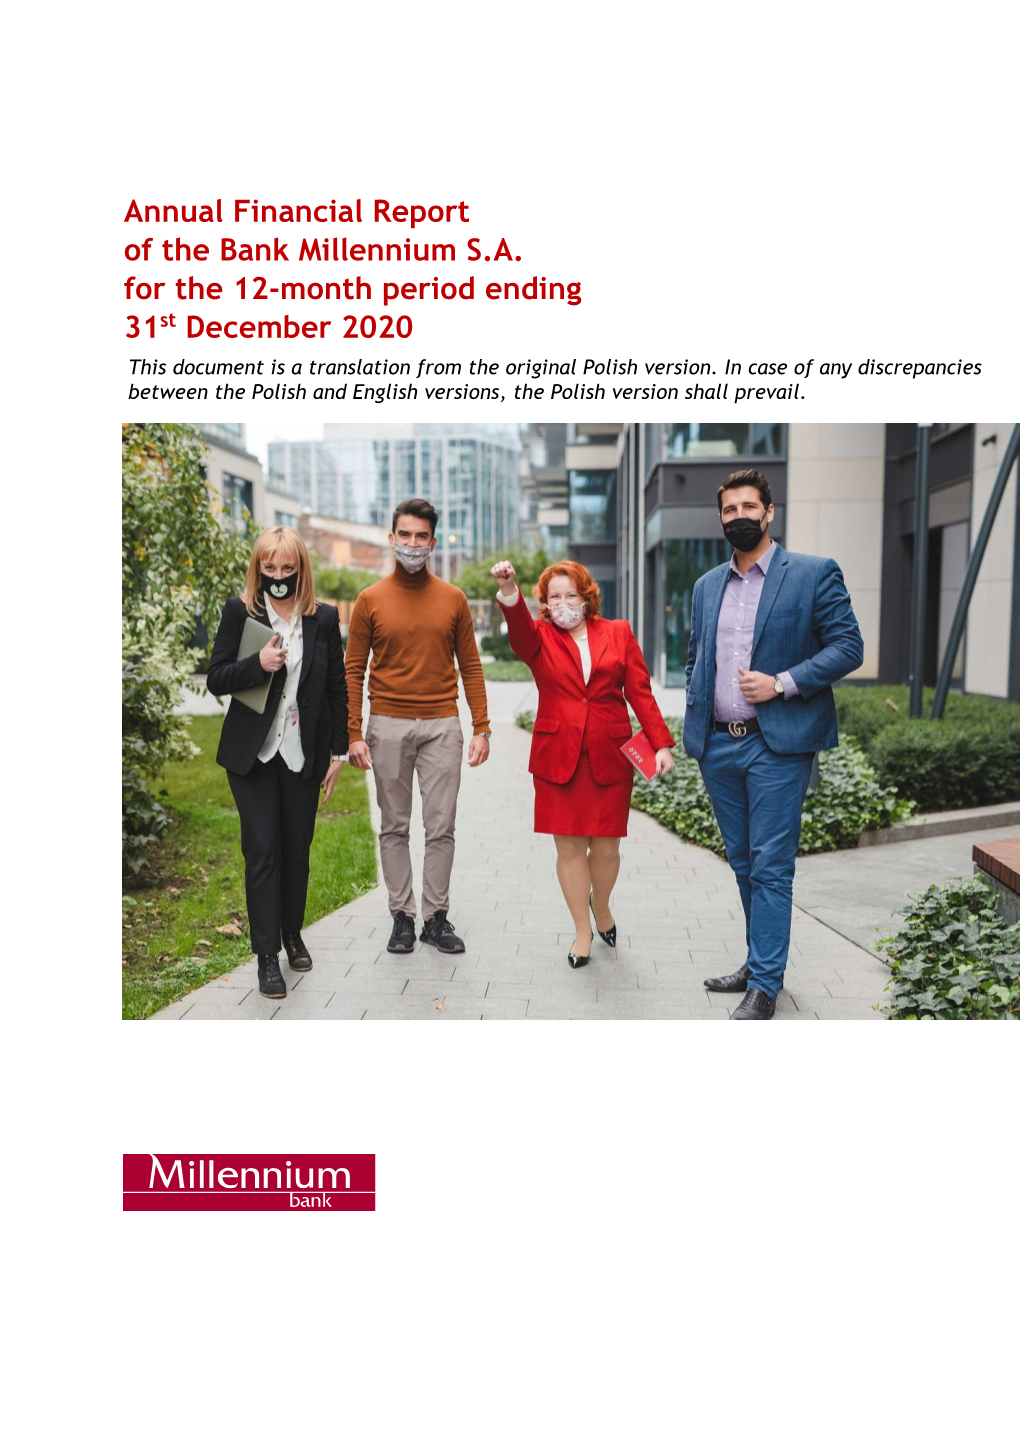 Annual Financial Report of the Bank Millennium SA for the 12-Month